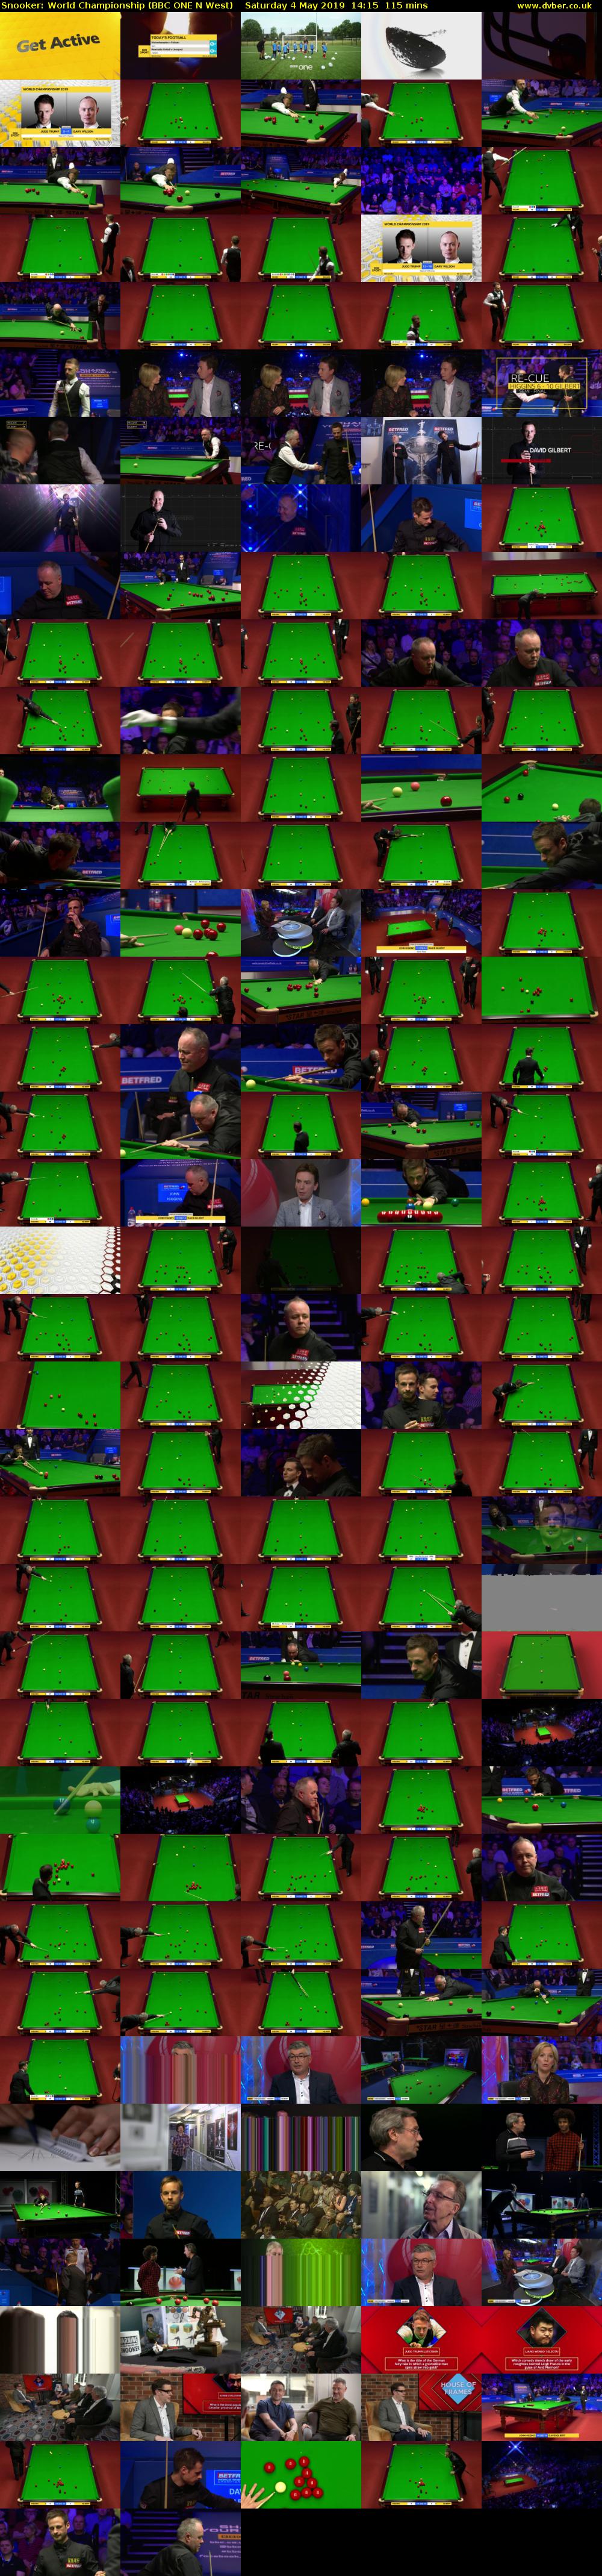 Snooker: World Championship (BBC ONE N West) Saturday 4 May 2019 14:15 - 16:10